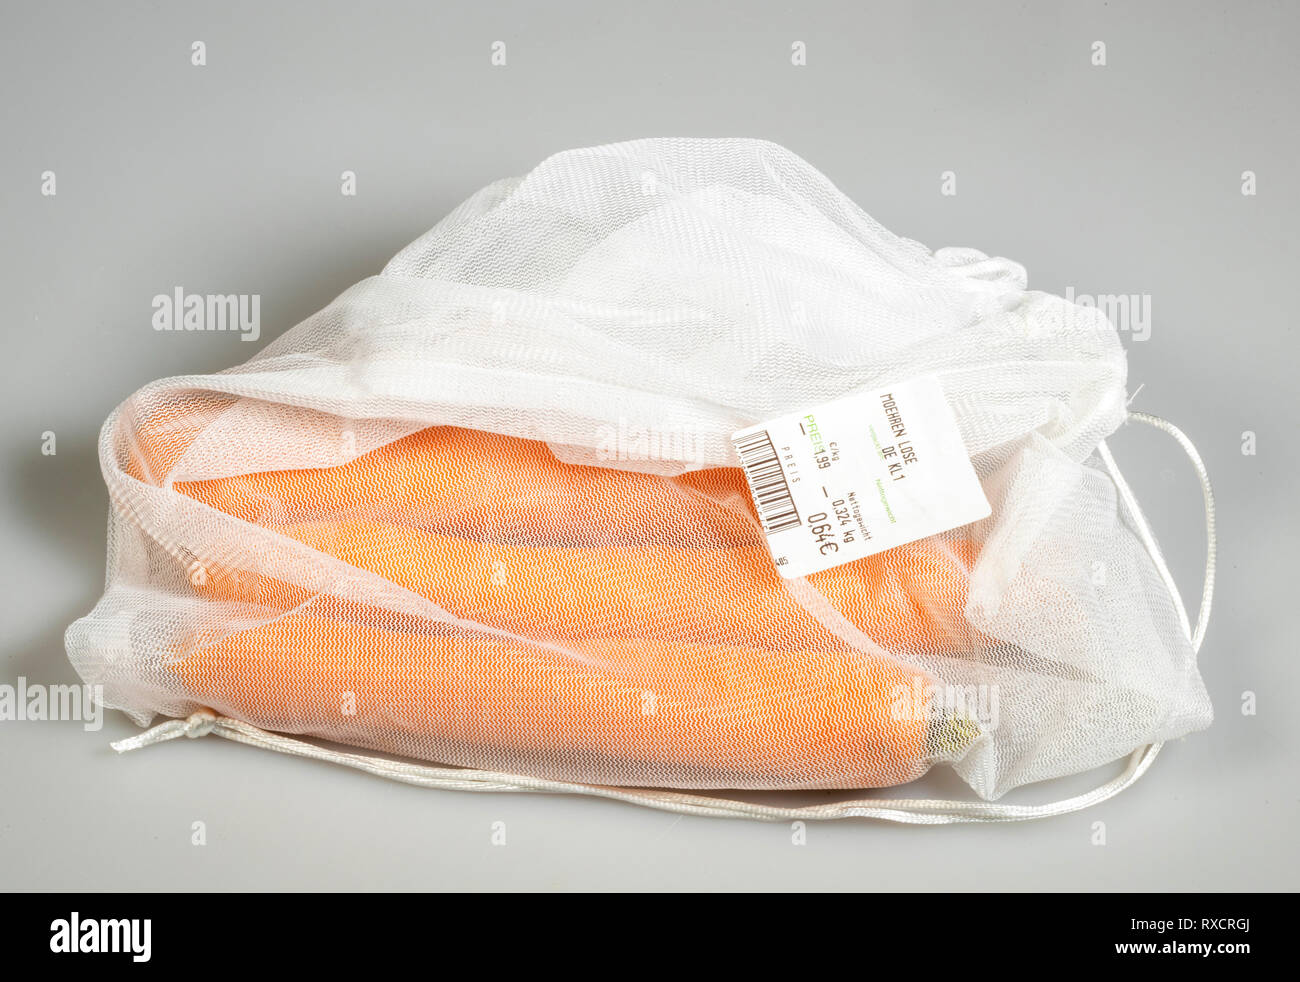 Food packaging, carrots in a reusable plastic net, avoidance of plastic waste, Stock Photo